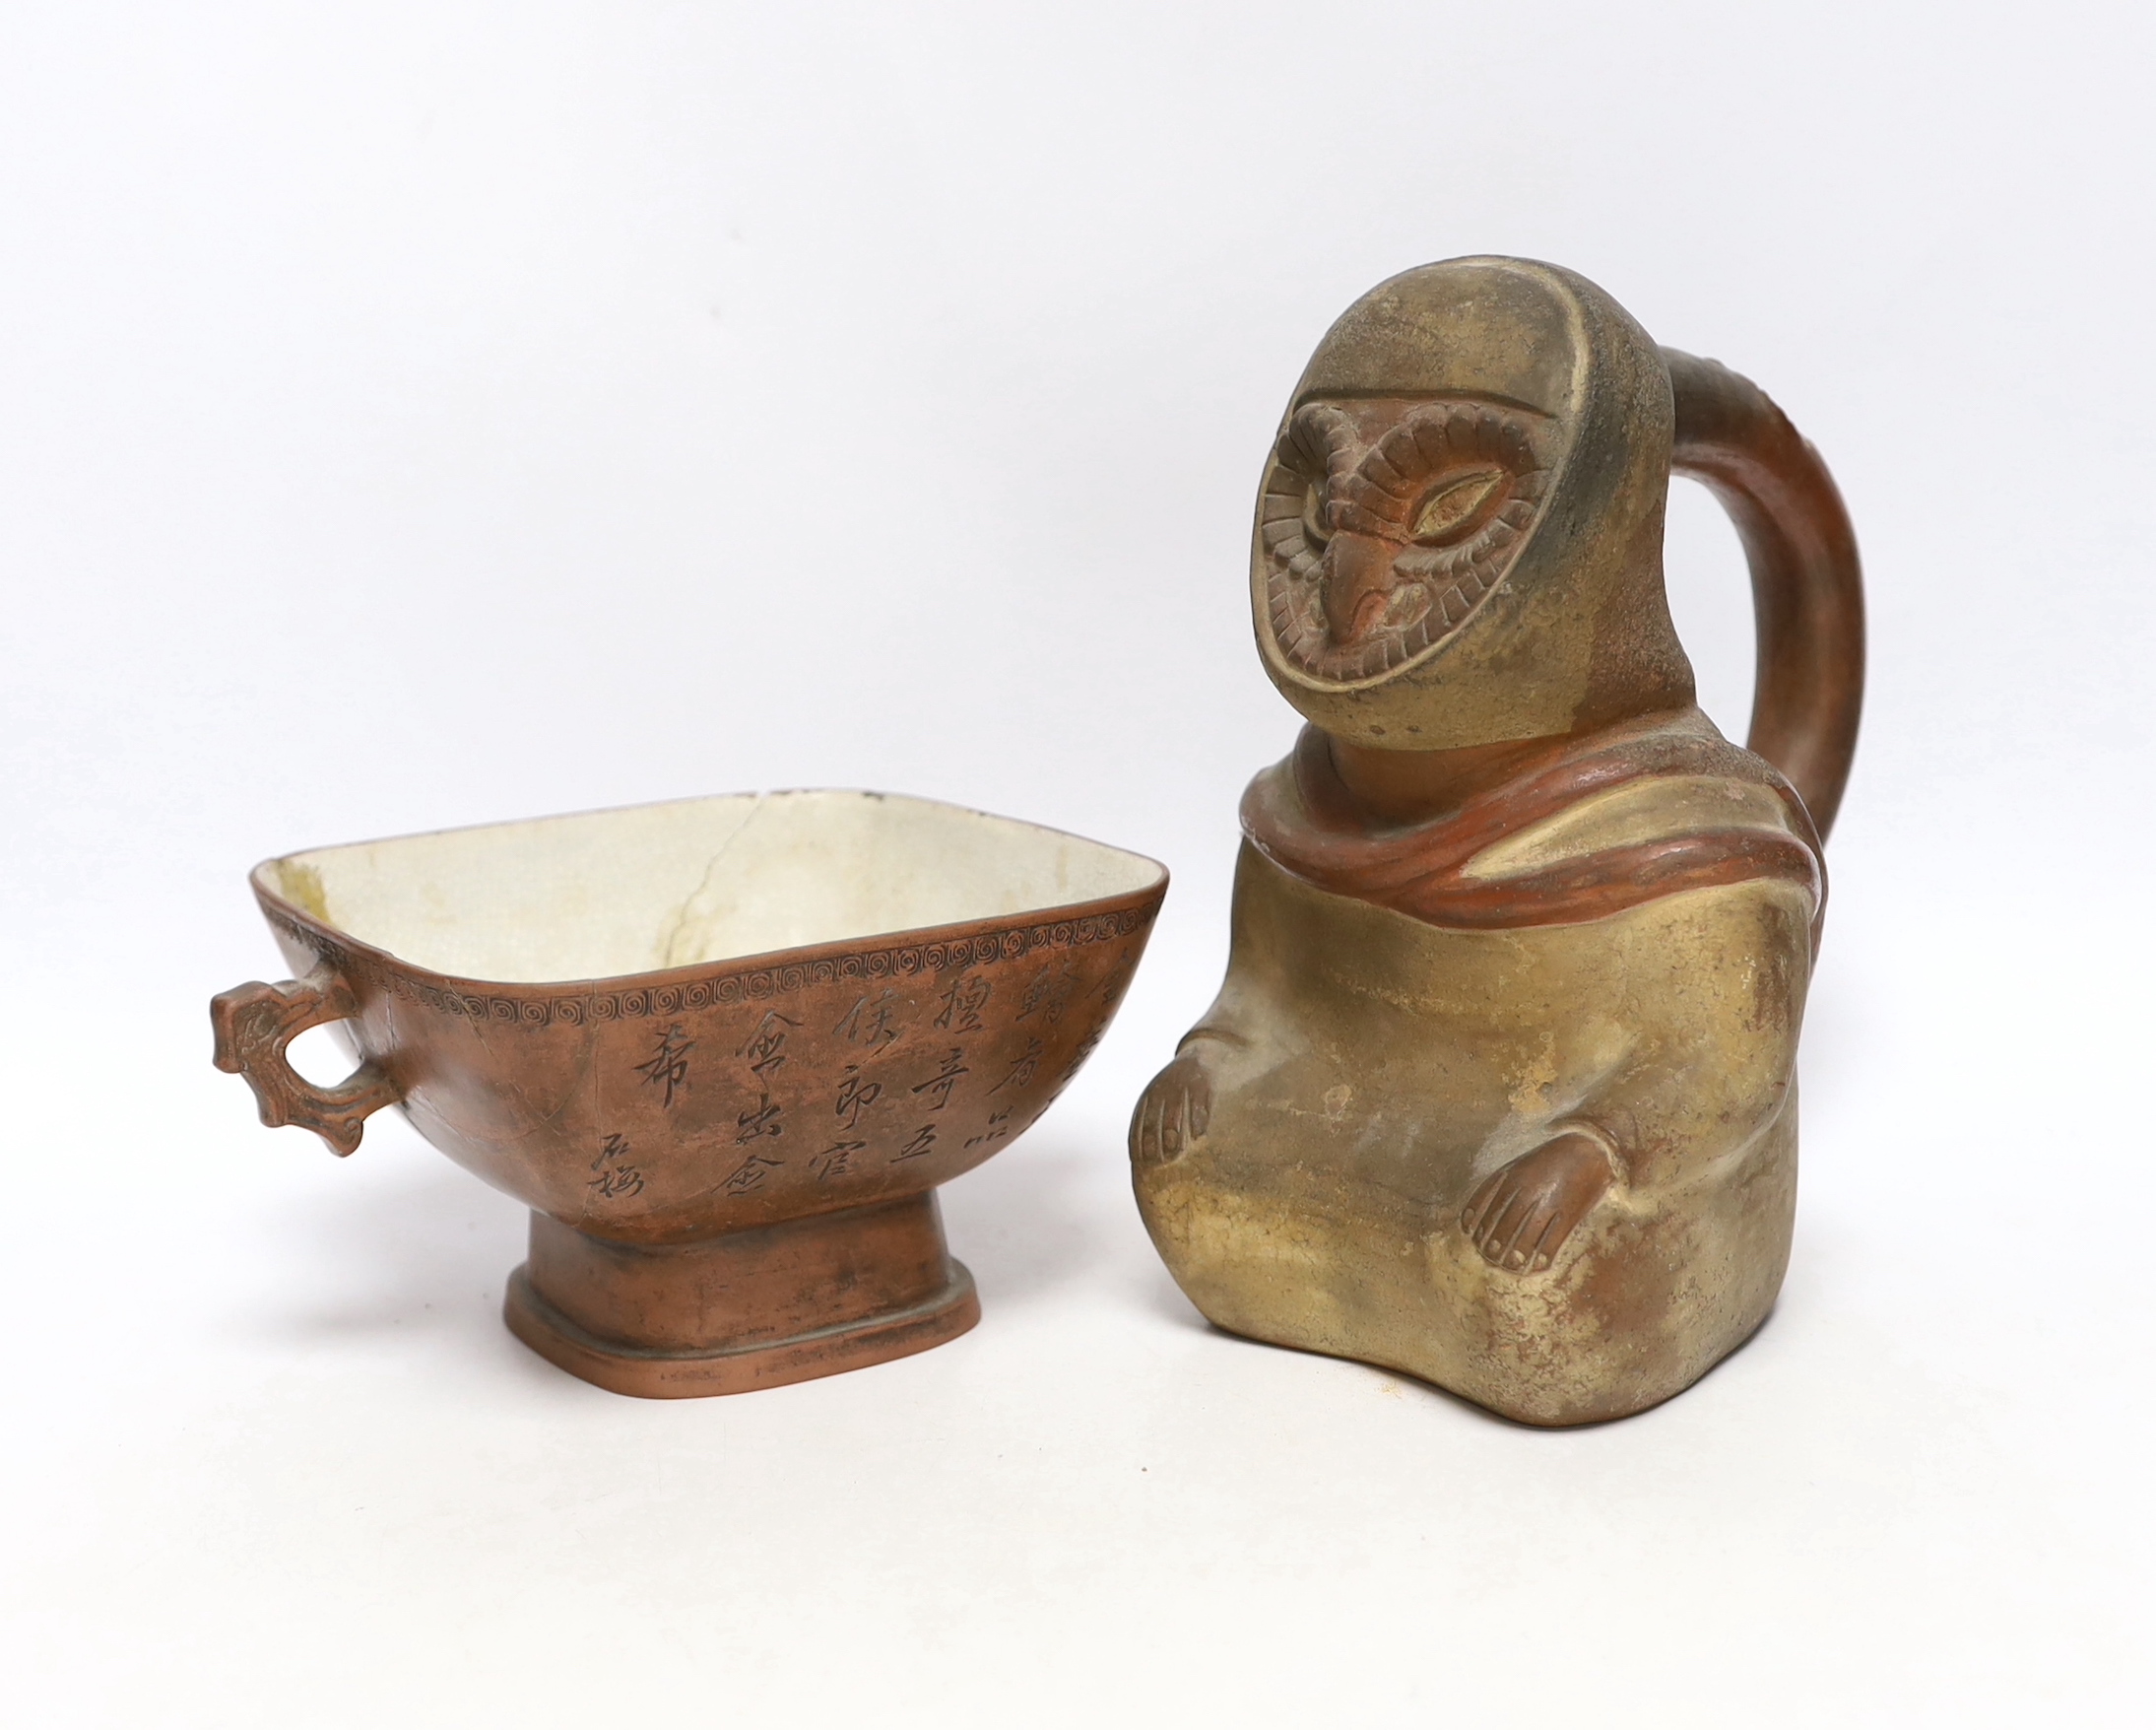 A 19th century Chinese Yixing bowl with character marks and a Peruvian vessel in the form of an owl, largest 22cm high